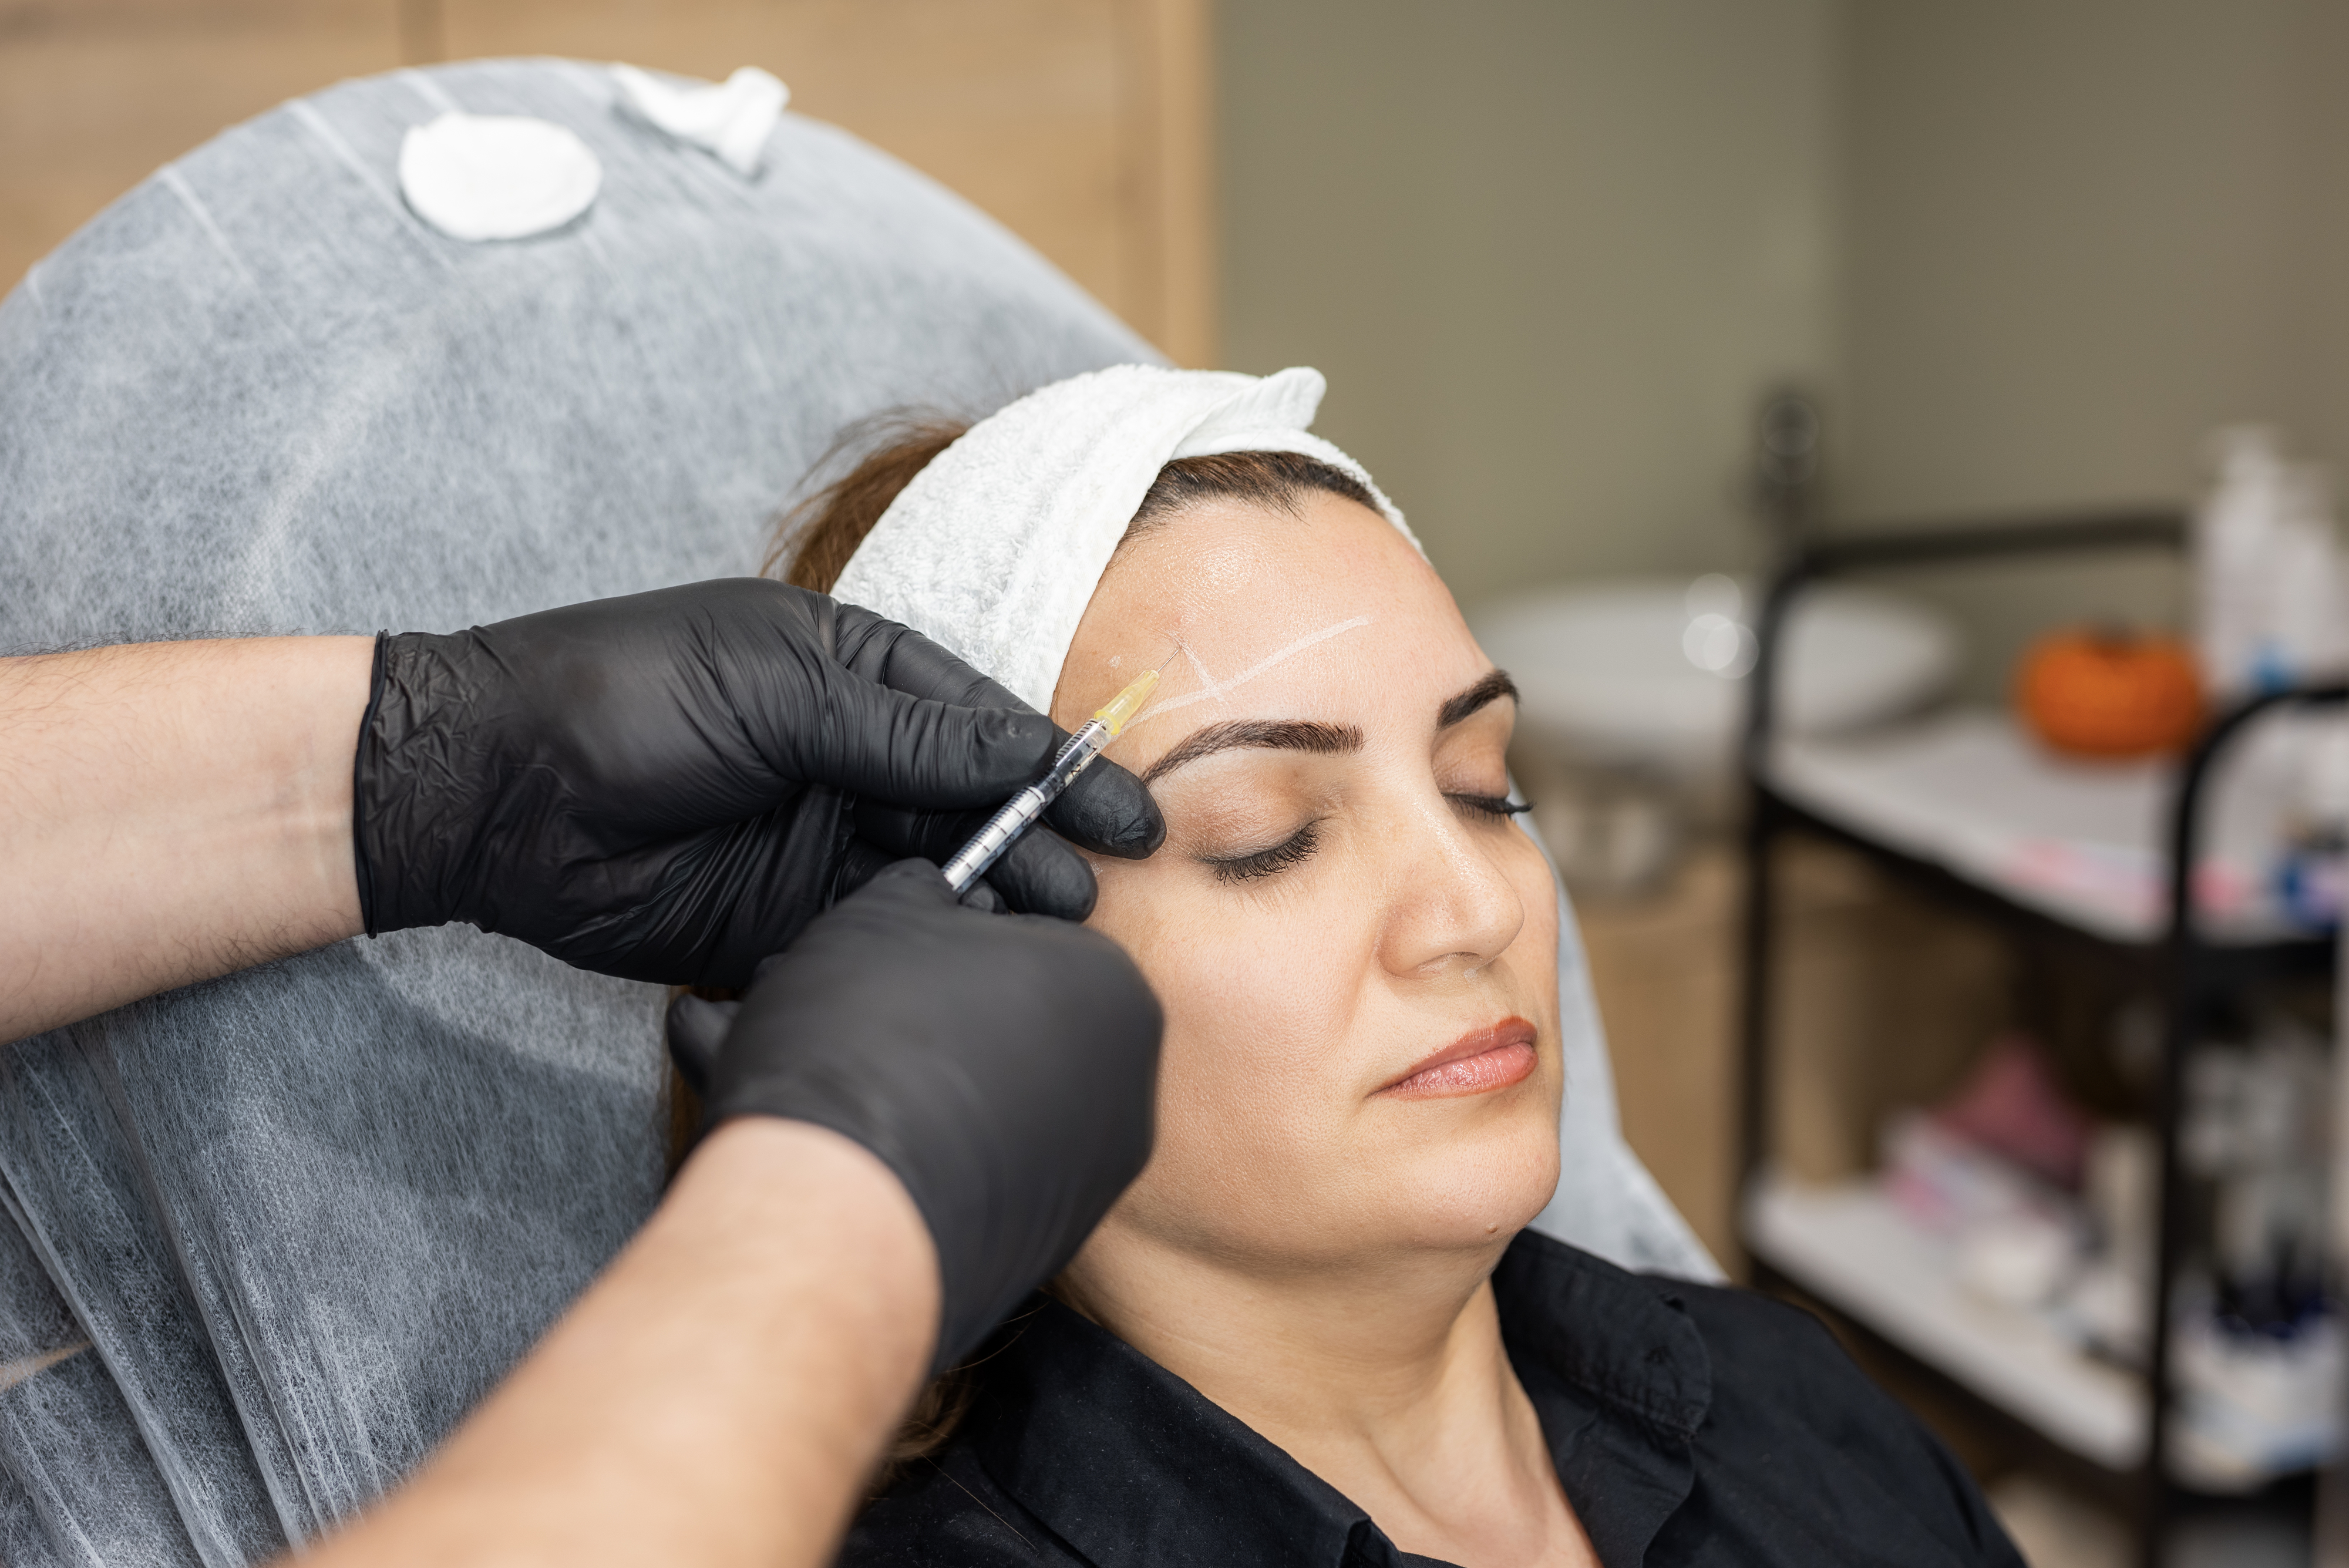 A person receiving eyebrow microblading treatment from a technician in a salon setting